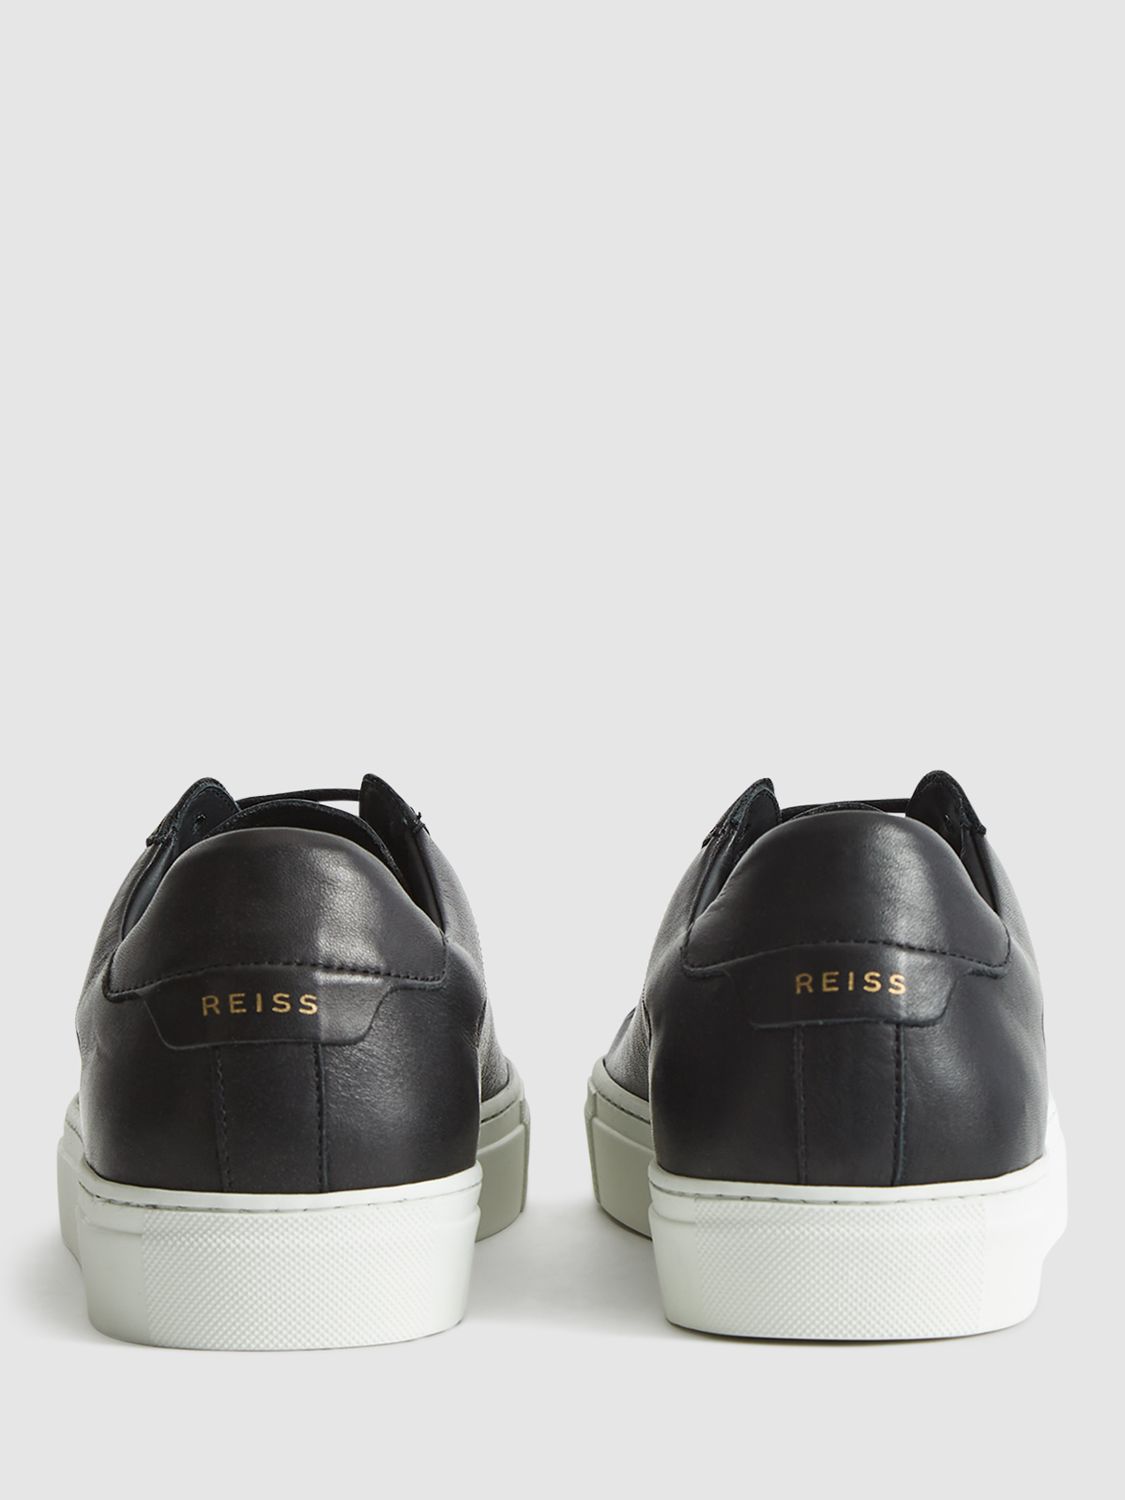 Reiss Finely Leather Trainers, Black at John Lewis & Partners